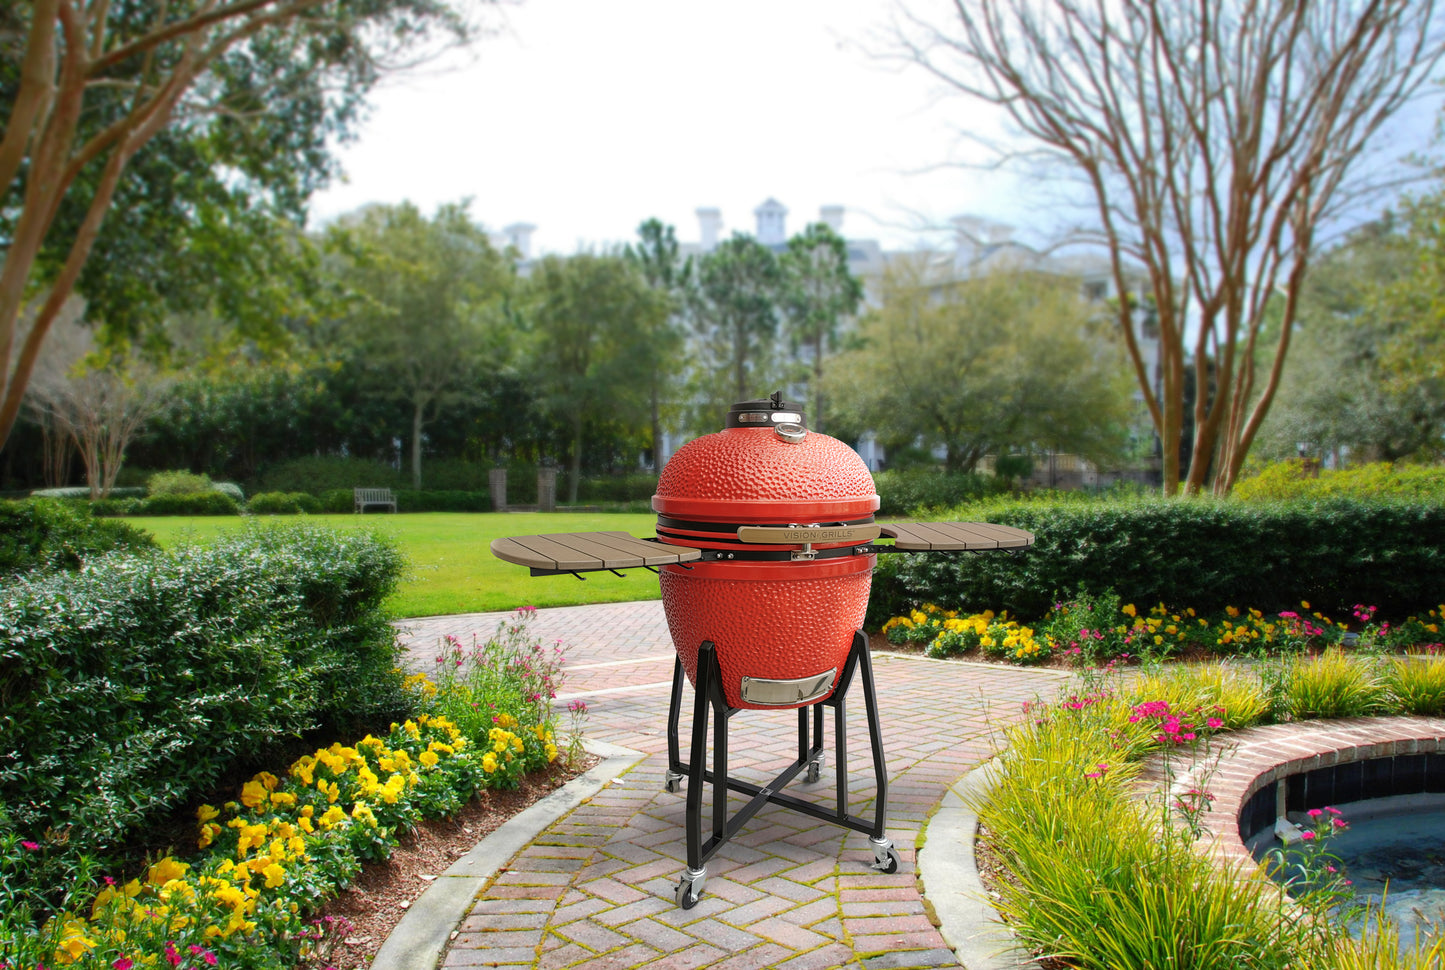 Vision Grills | Heavy Duty 1-Series Ceramic Kamado Grill in Red B-R2C2AX-S